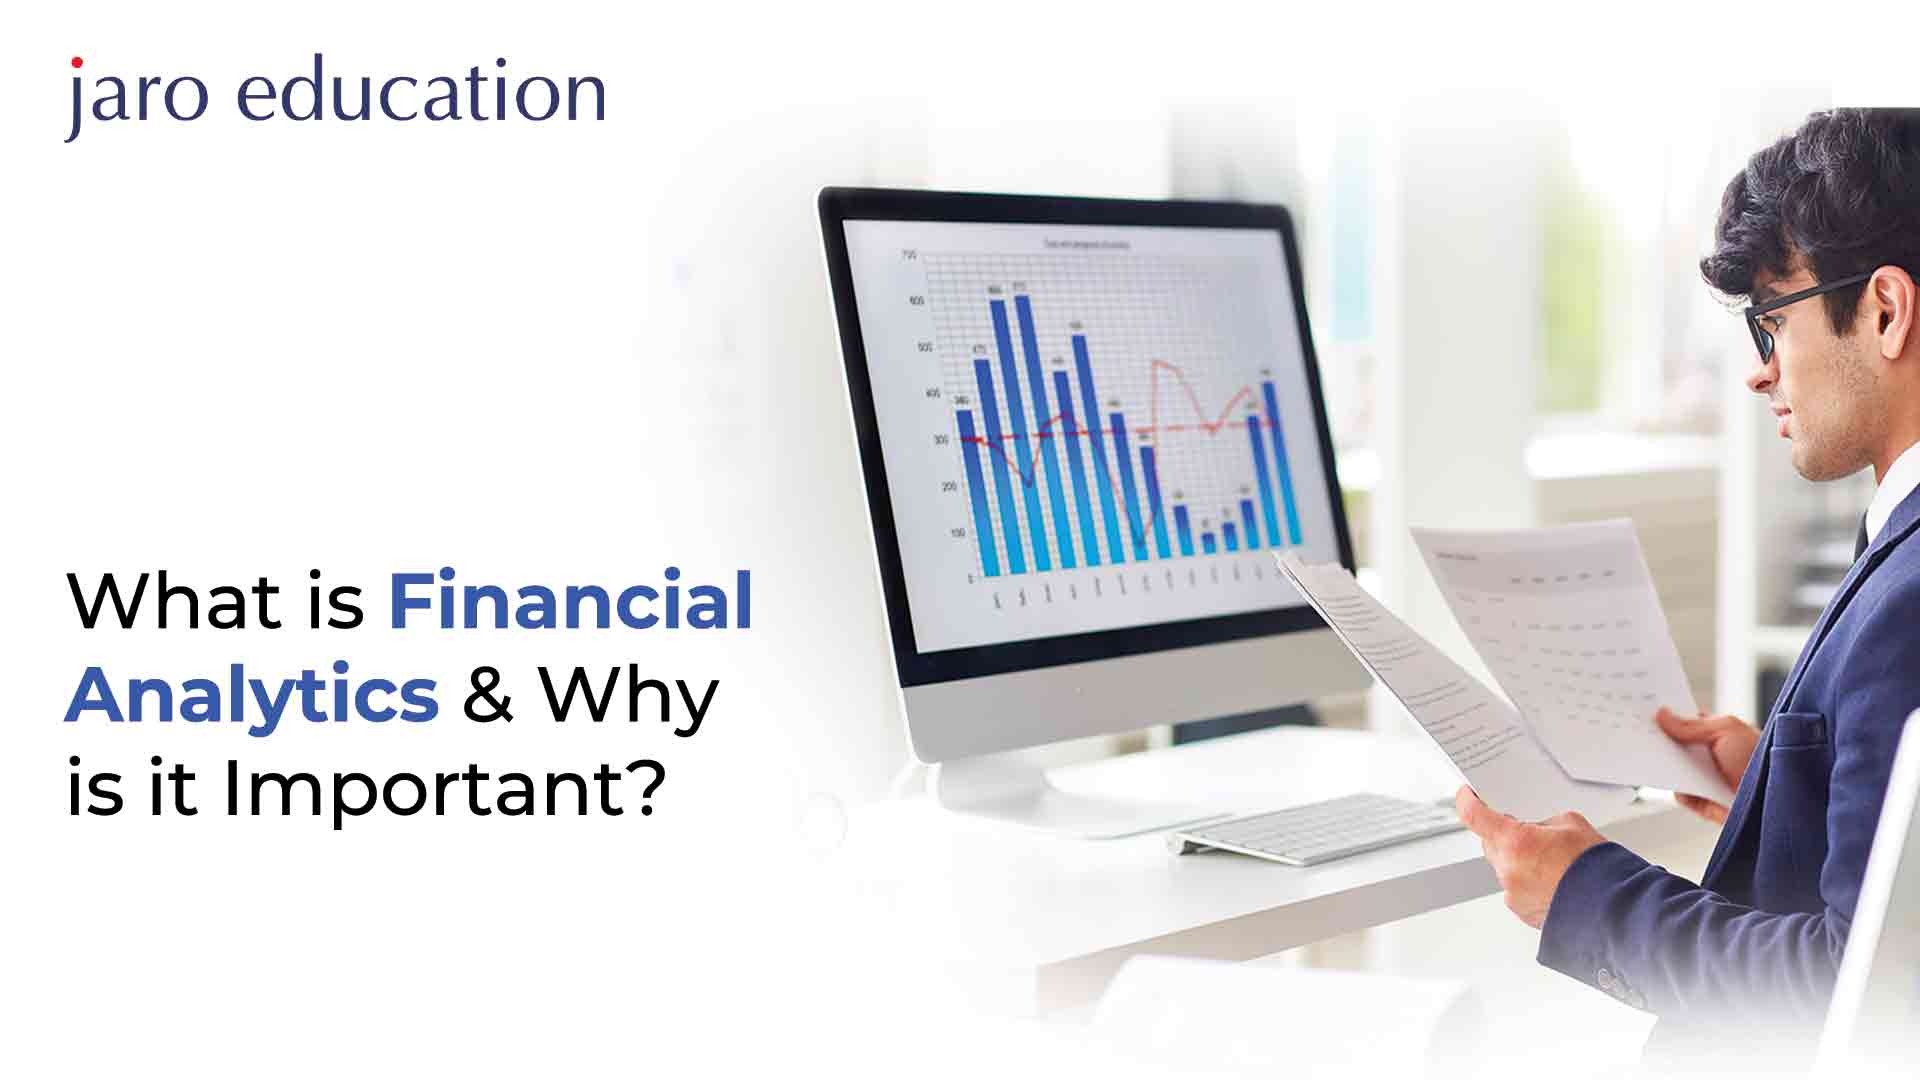 What Is Financial Analytics & Why Is It Important